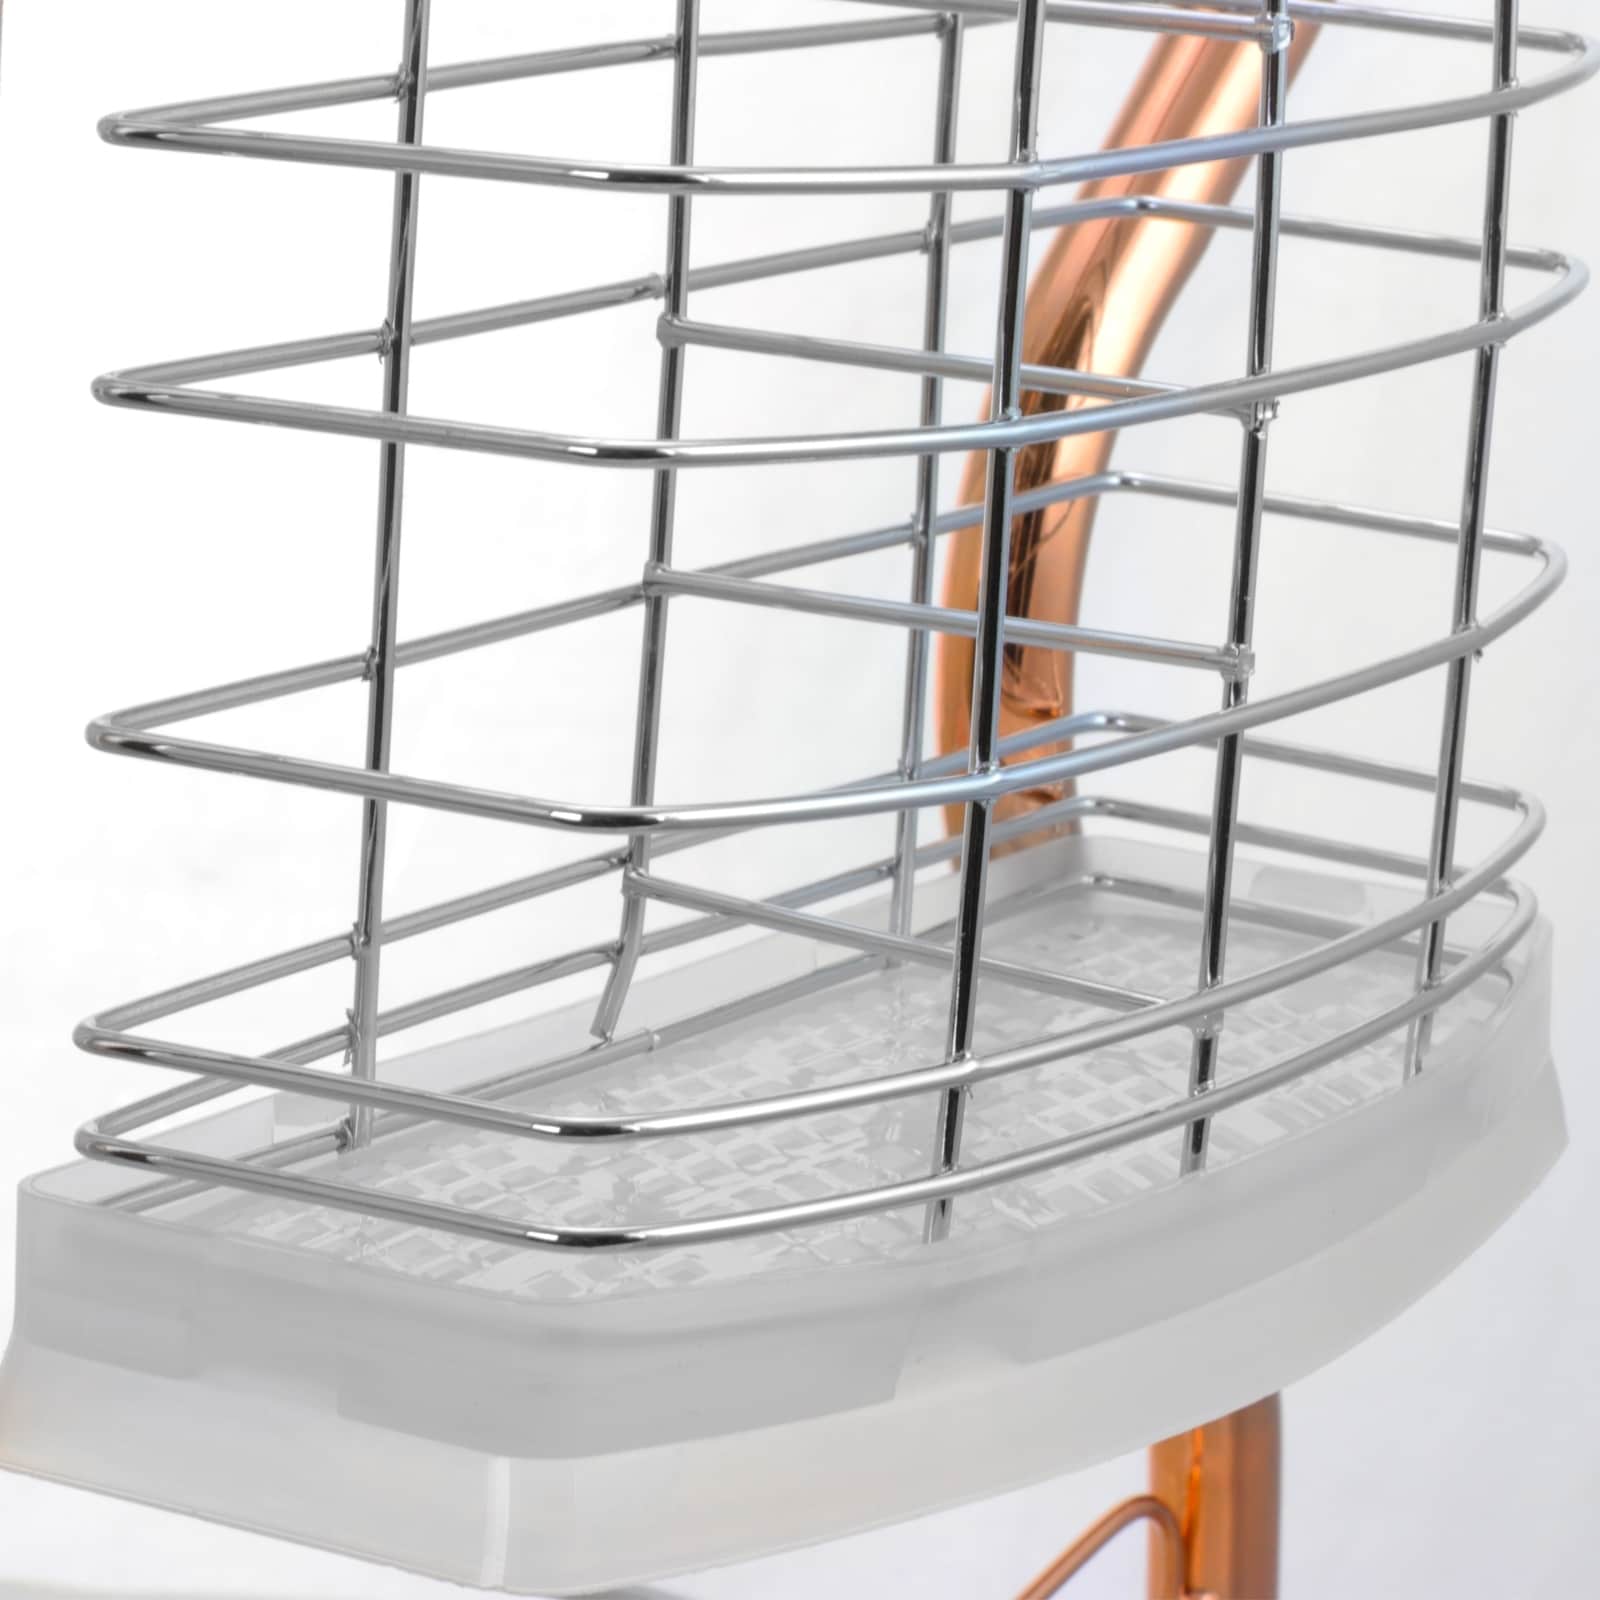 Jiallo Stainless Steel 2-Tier Dish Rack with Dripping Tray (Rose Gold) - 20-3/4x9-1/4x14-1/8